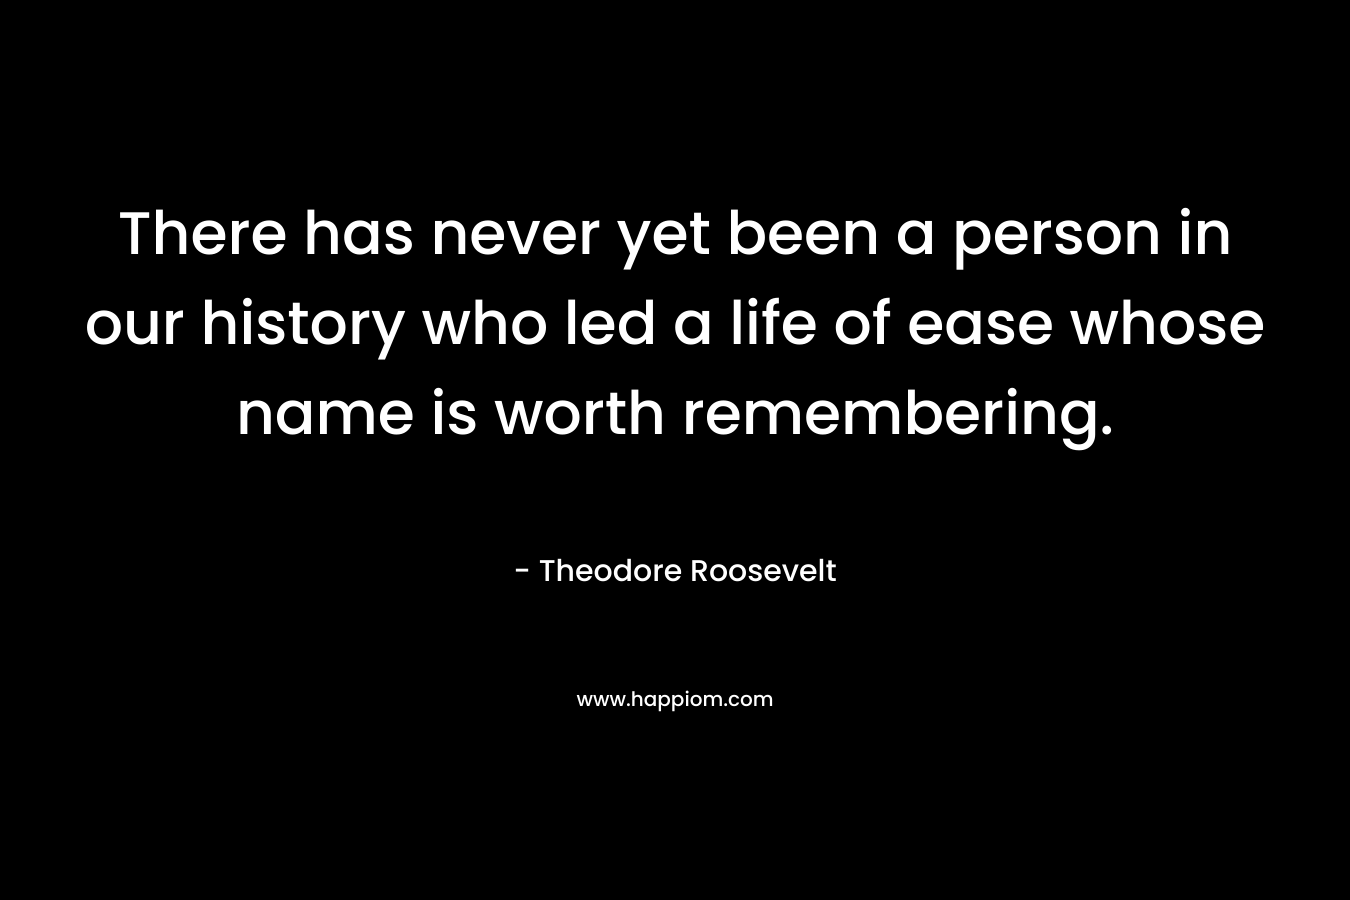 There has never yet been a person in our history who led a life of ease whose name is worth remembering.